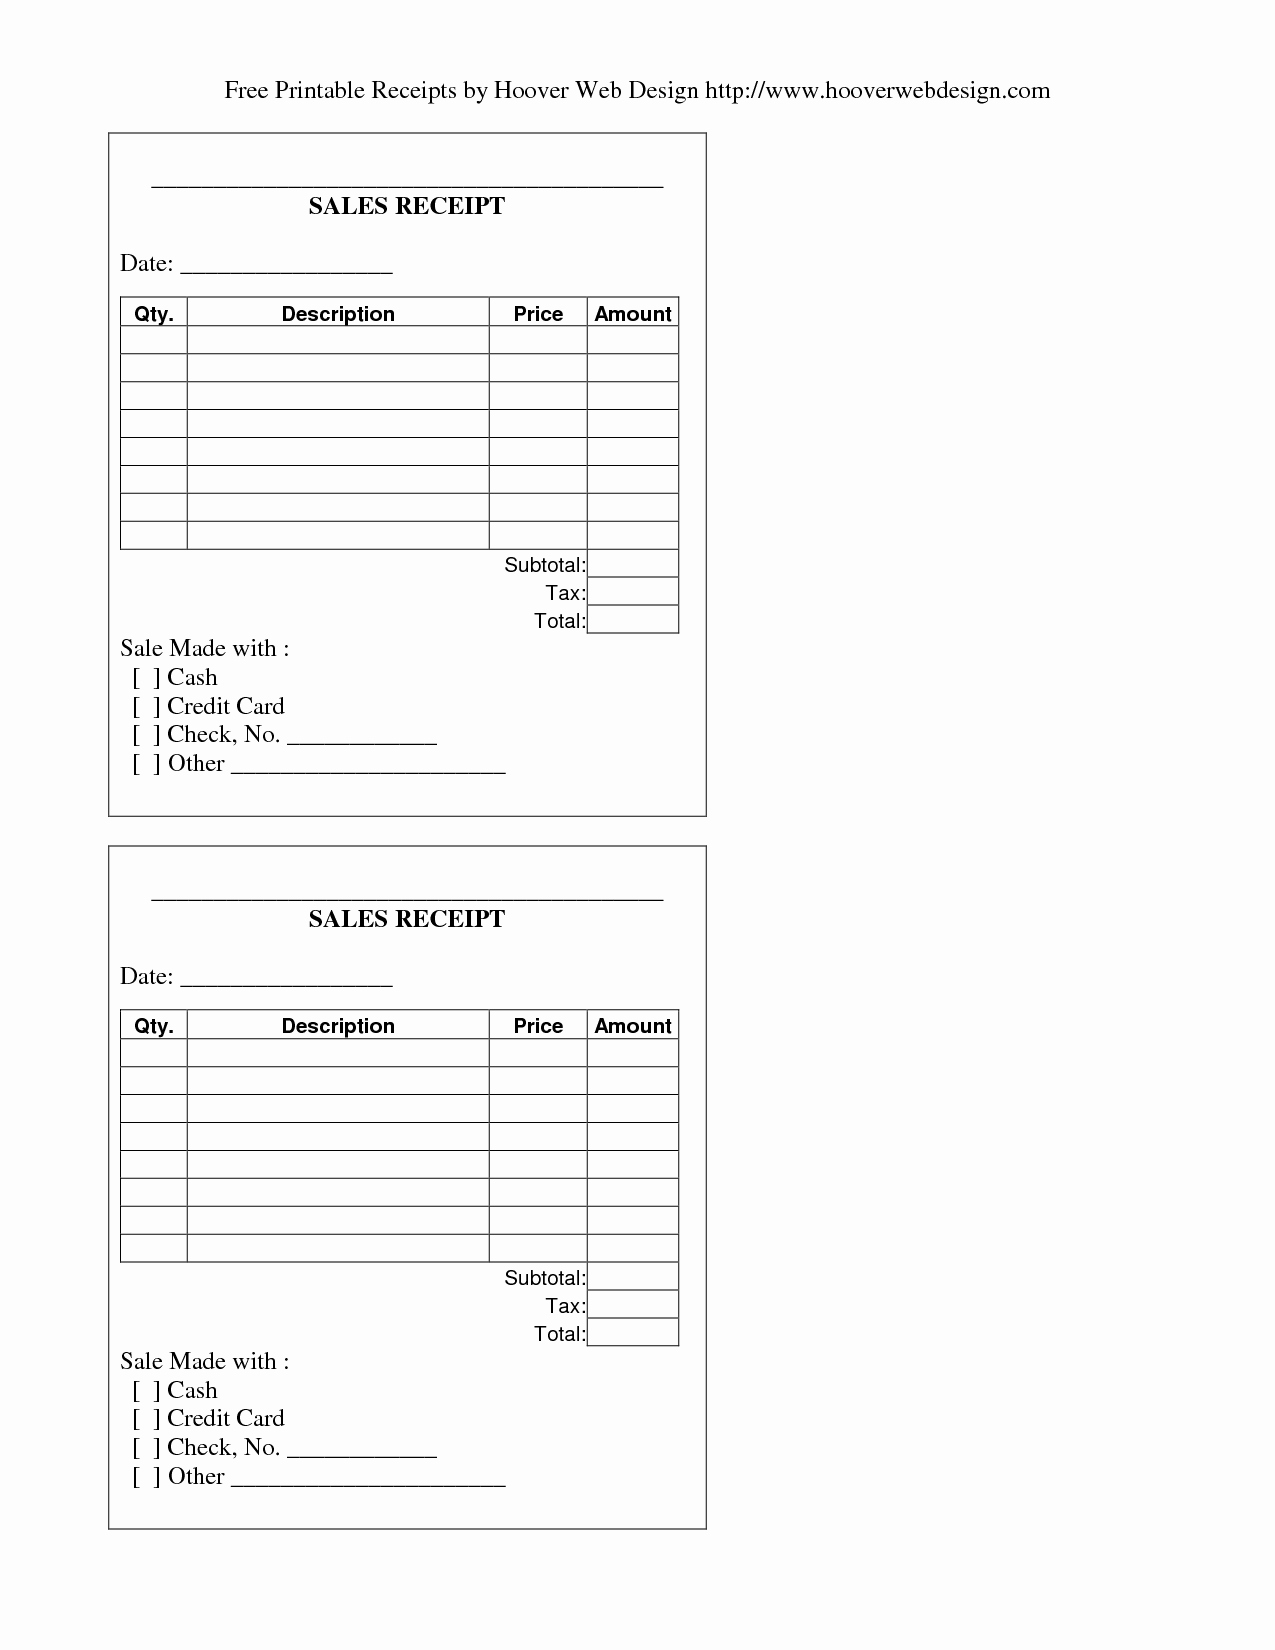 Free Invoice Receipt Template Inspirational Blank Receipt form Example Mughals